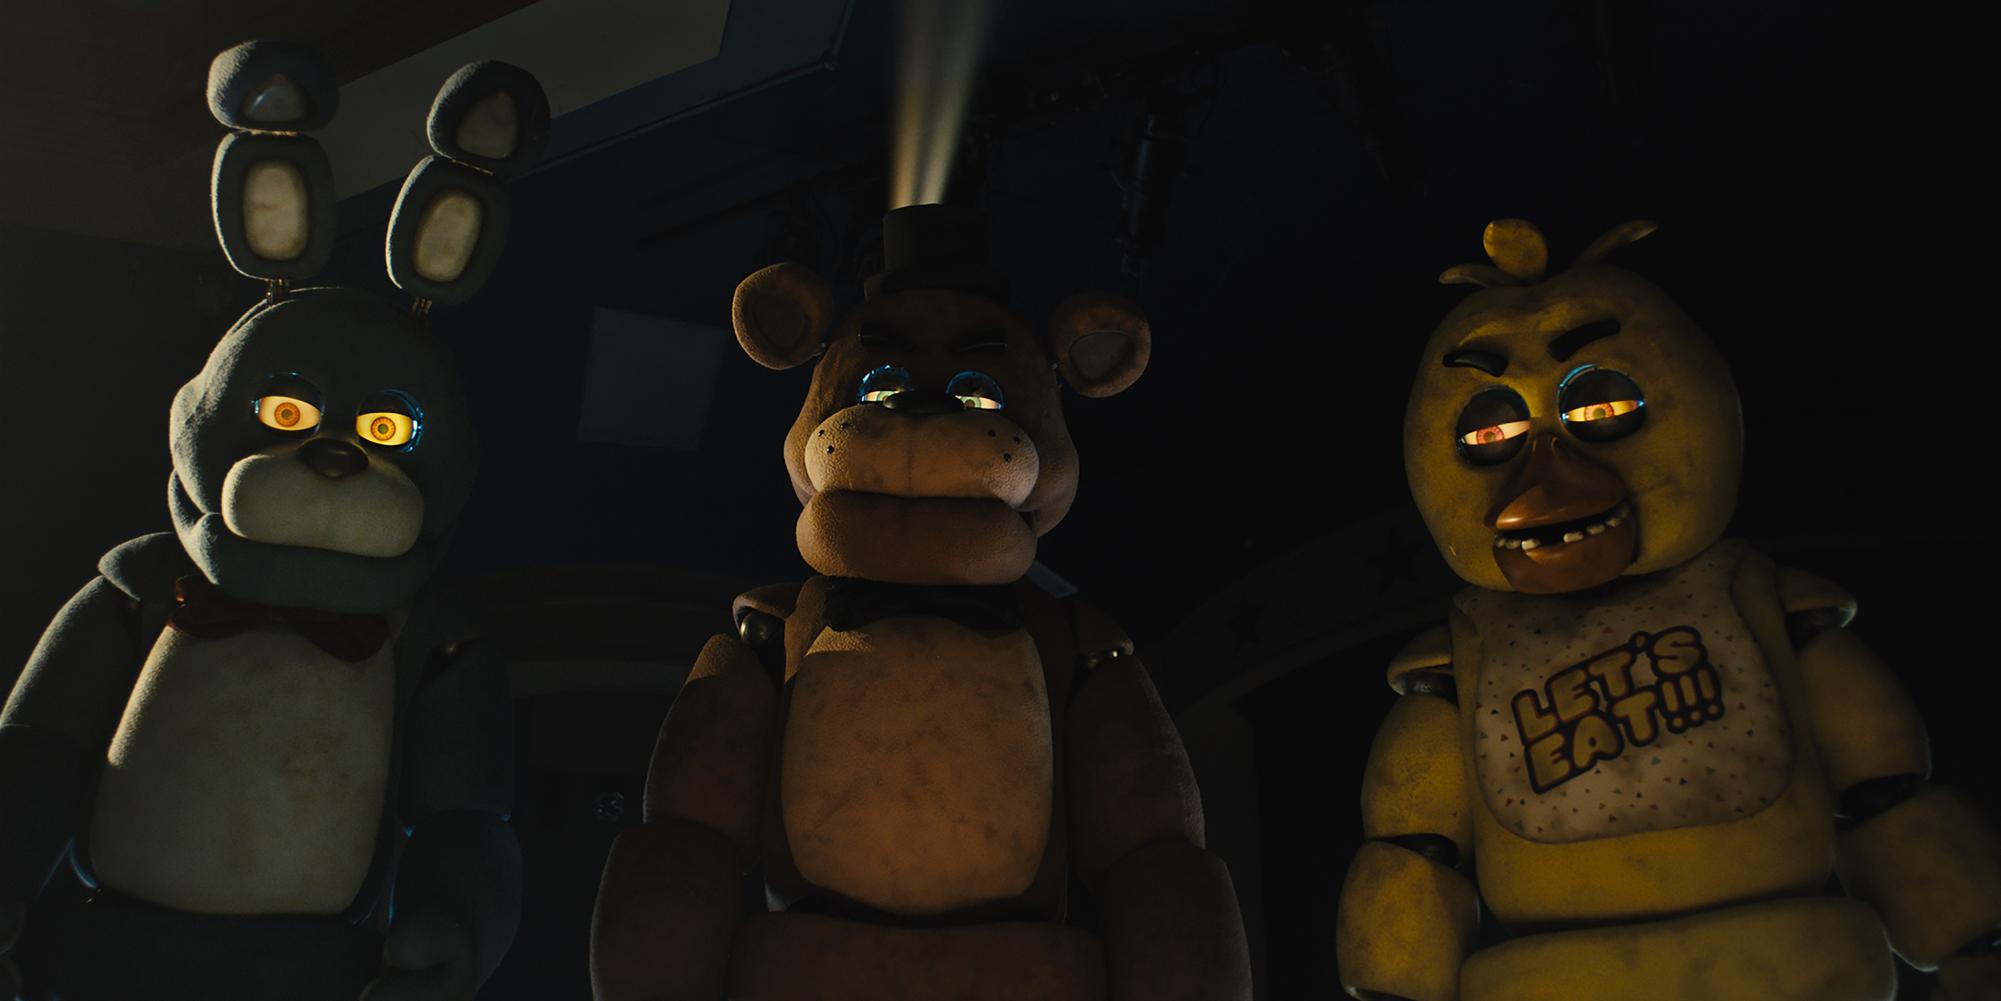 Is Golden Freddy Vanessa Or Mike's Little Brother In The Five